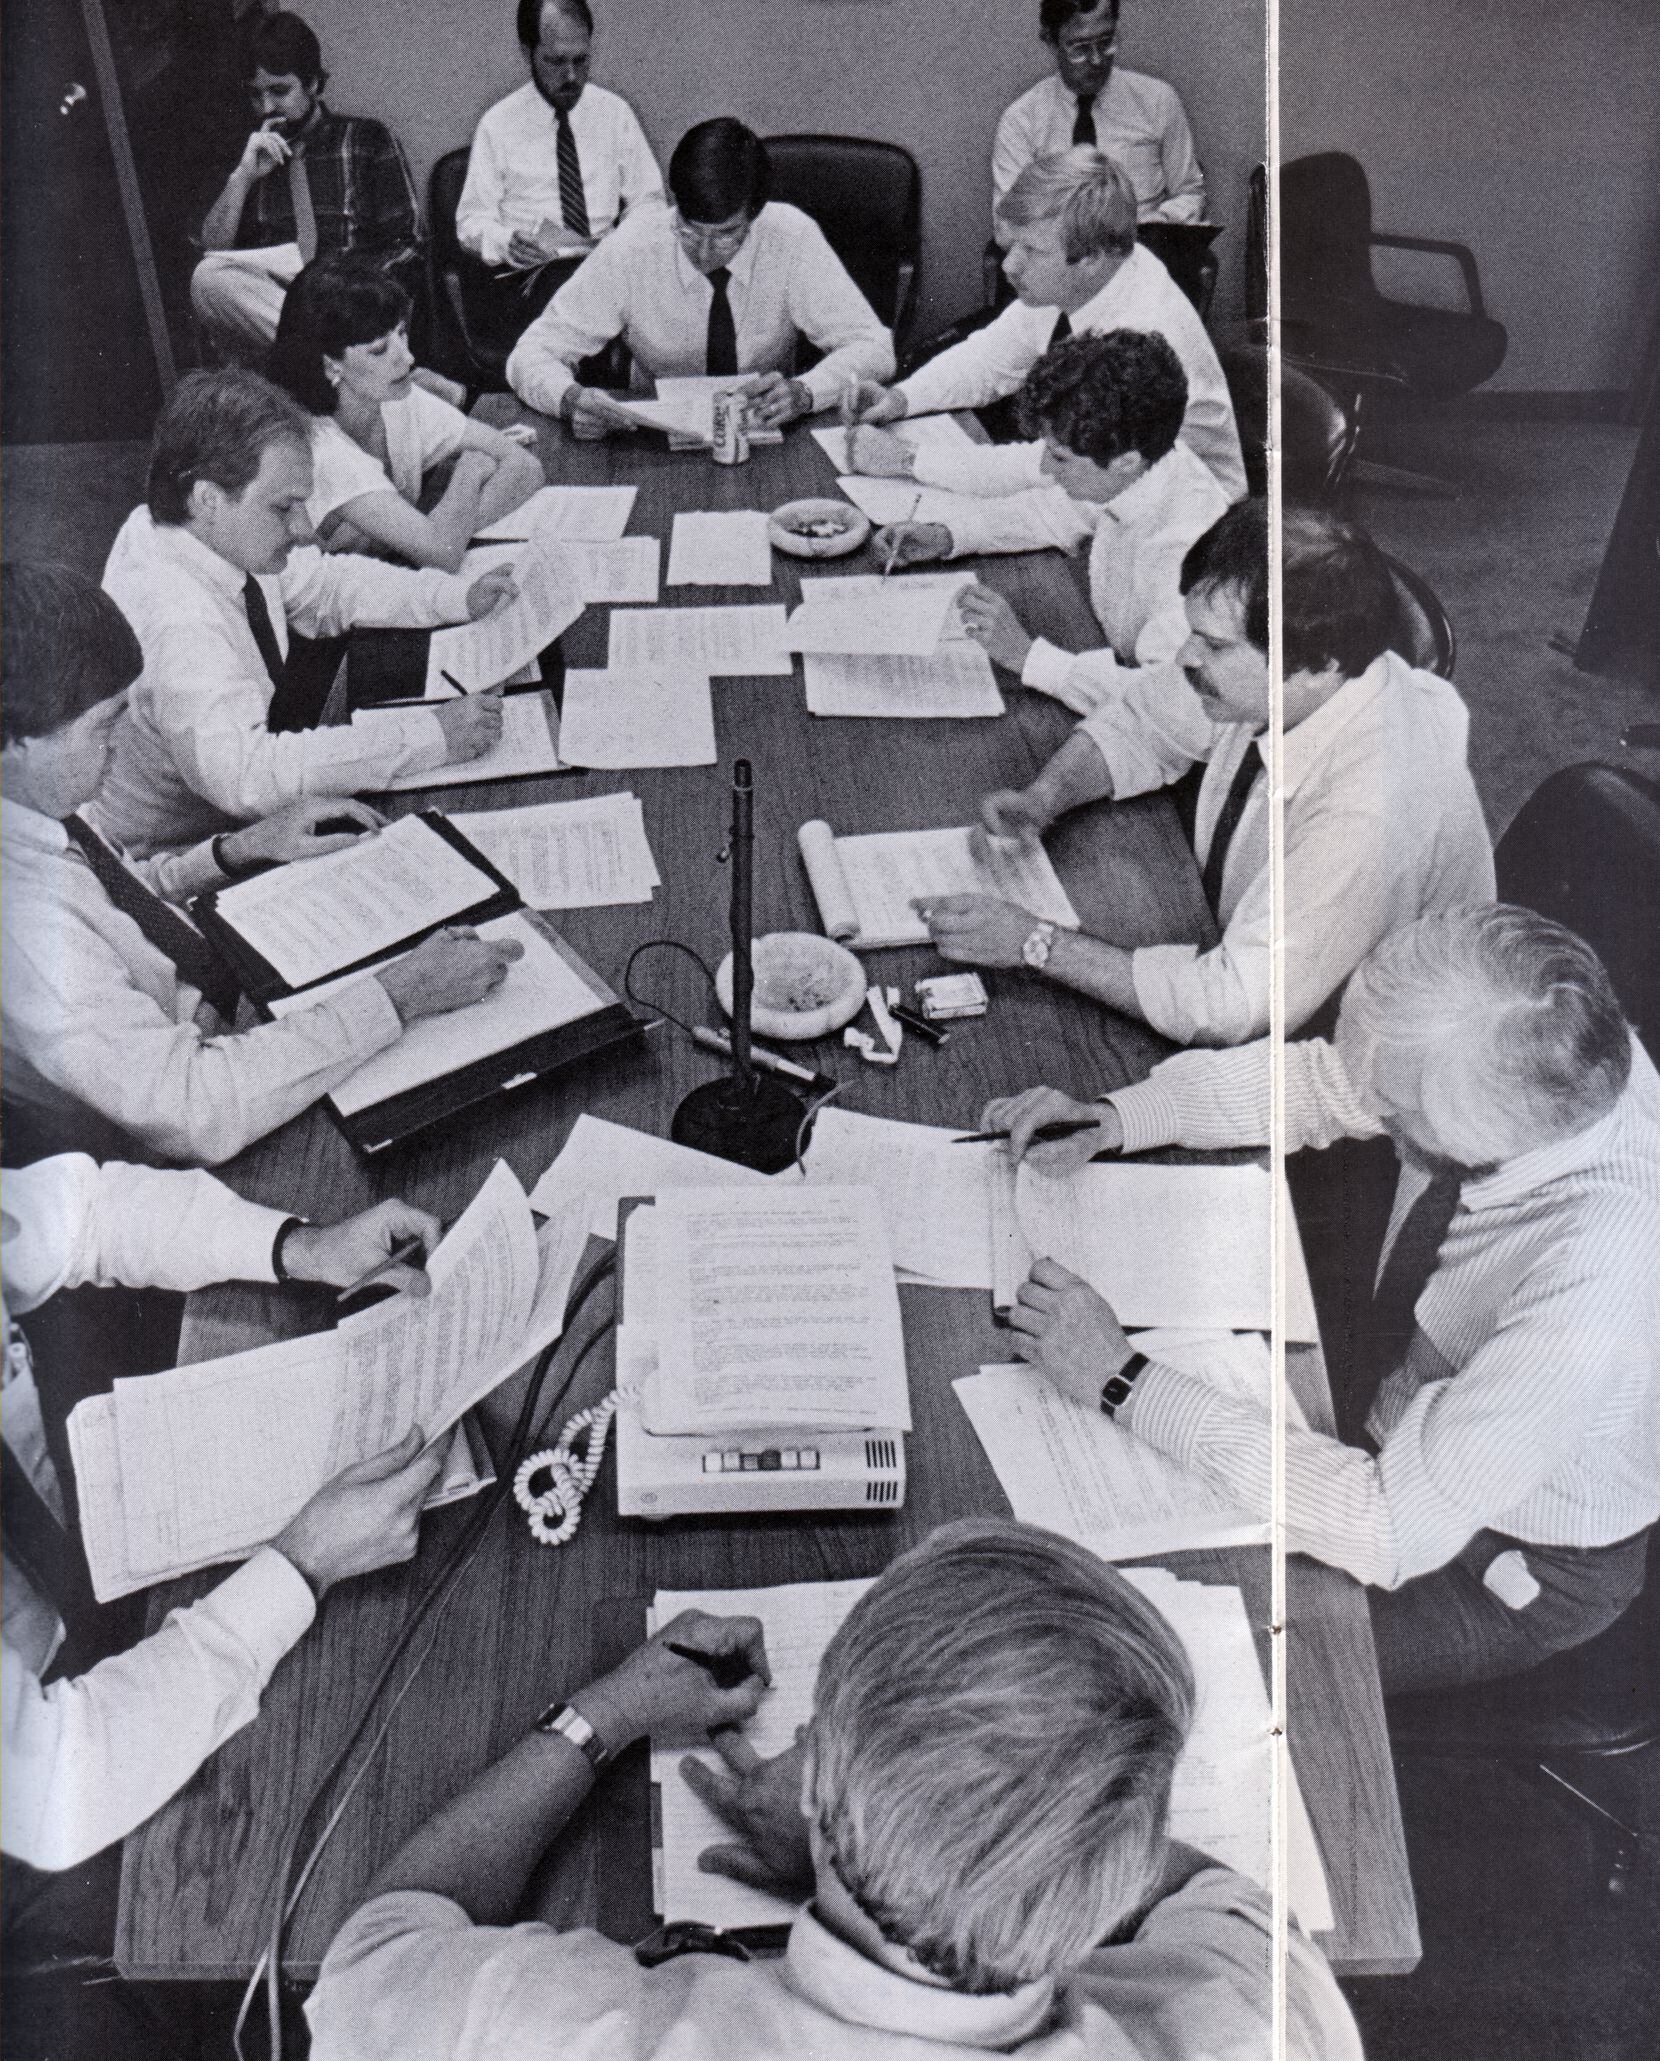 In 1985, Dallas Morning News editors were shown gathering at the daily 3 p.m. "budget"...